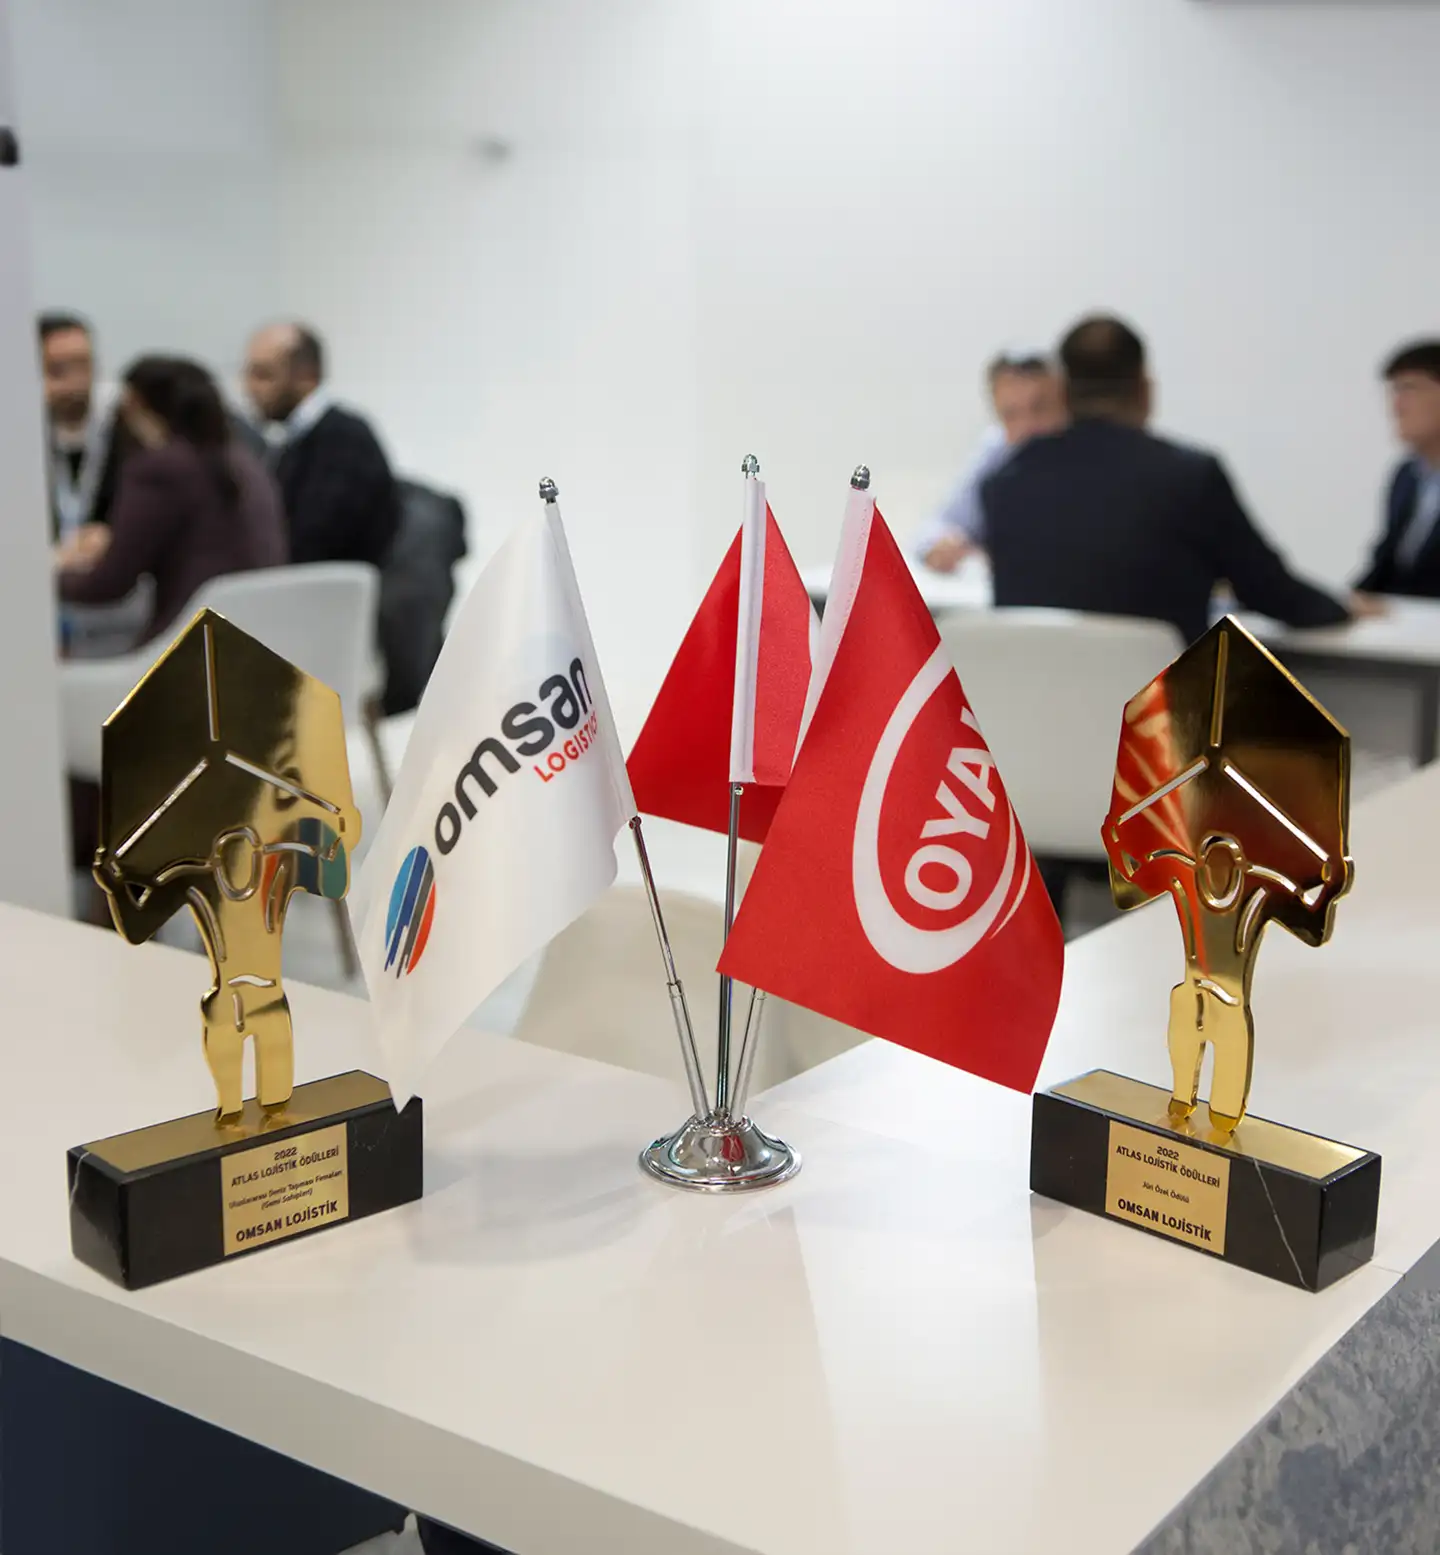 Two awards to Omsan Logistics